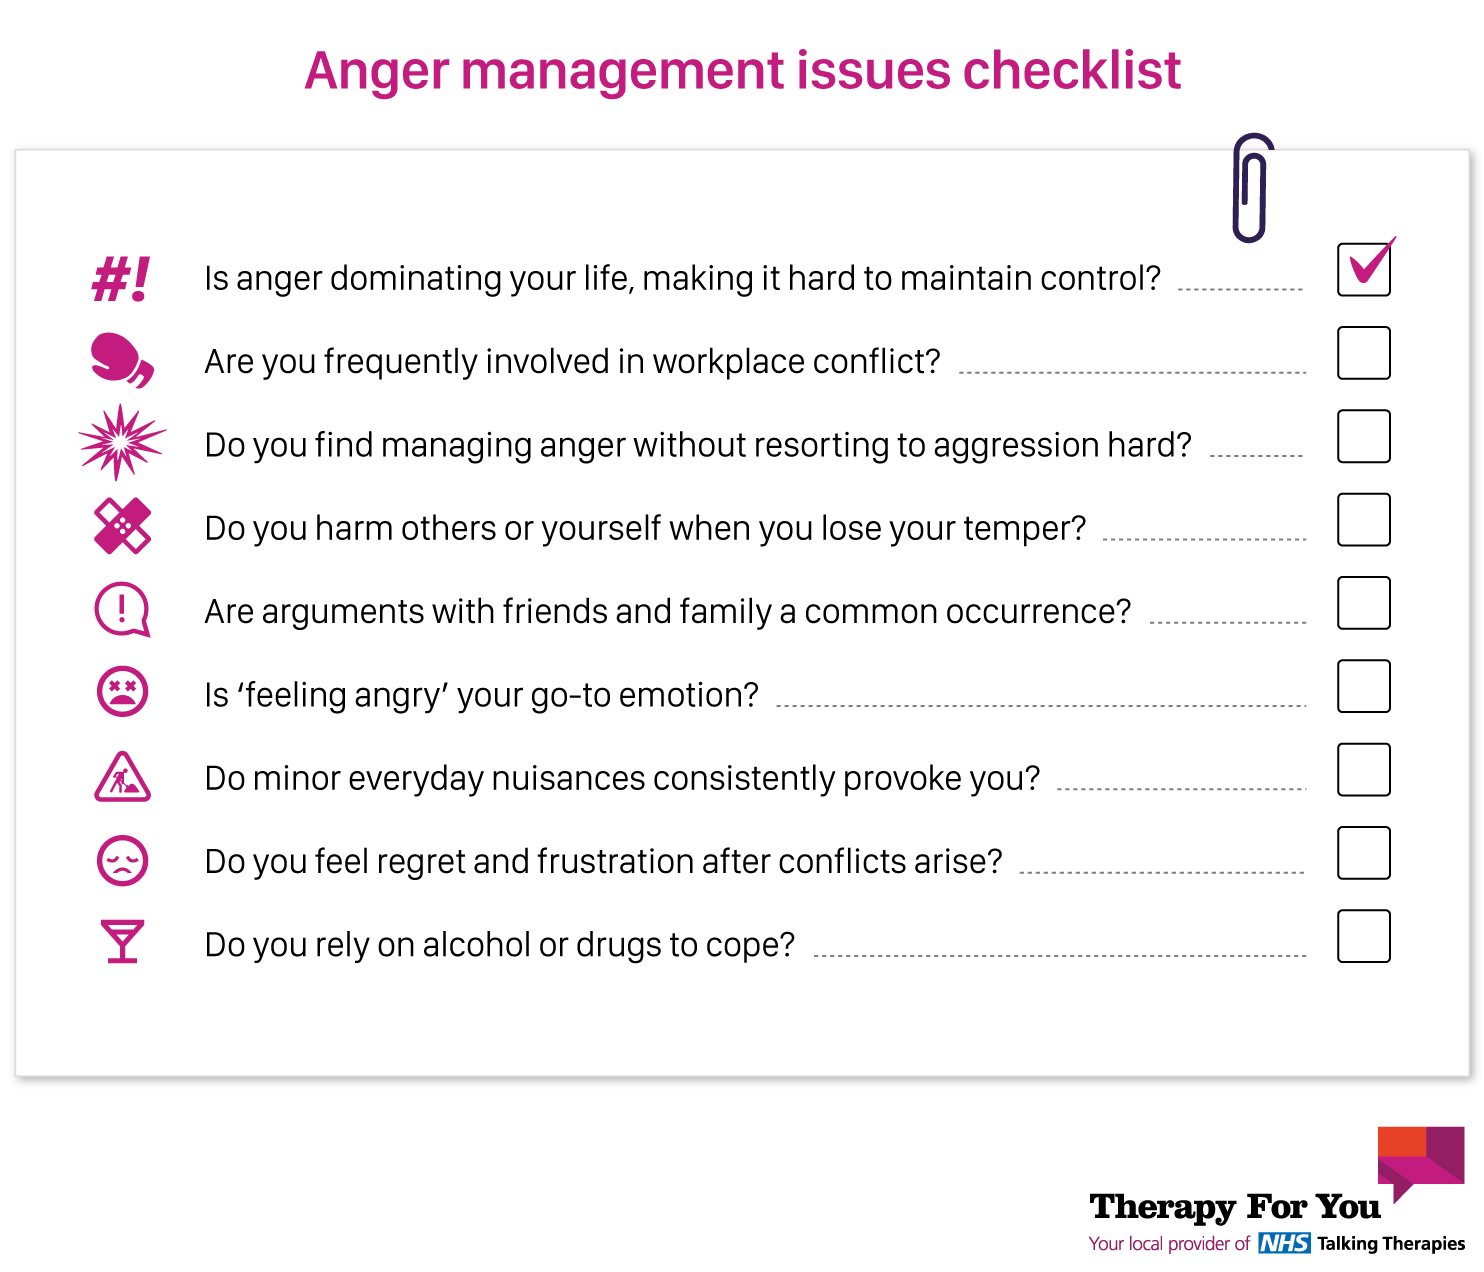 Image showing an Anger management issues checklist to see if you need to speak to a qualified professional